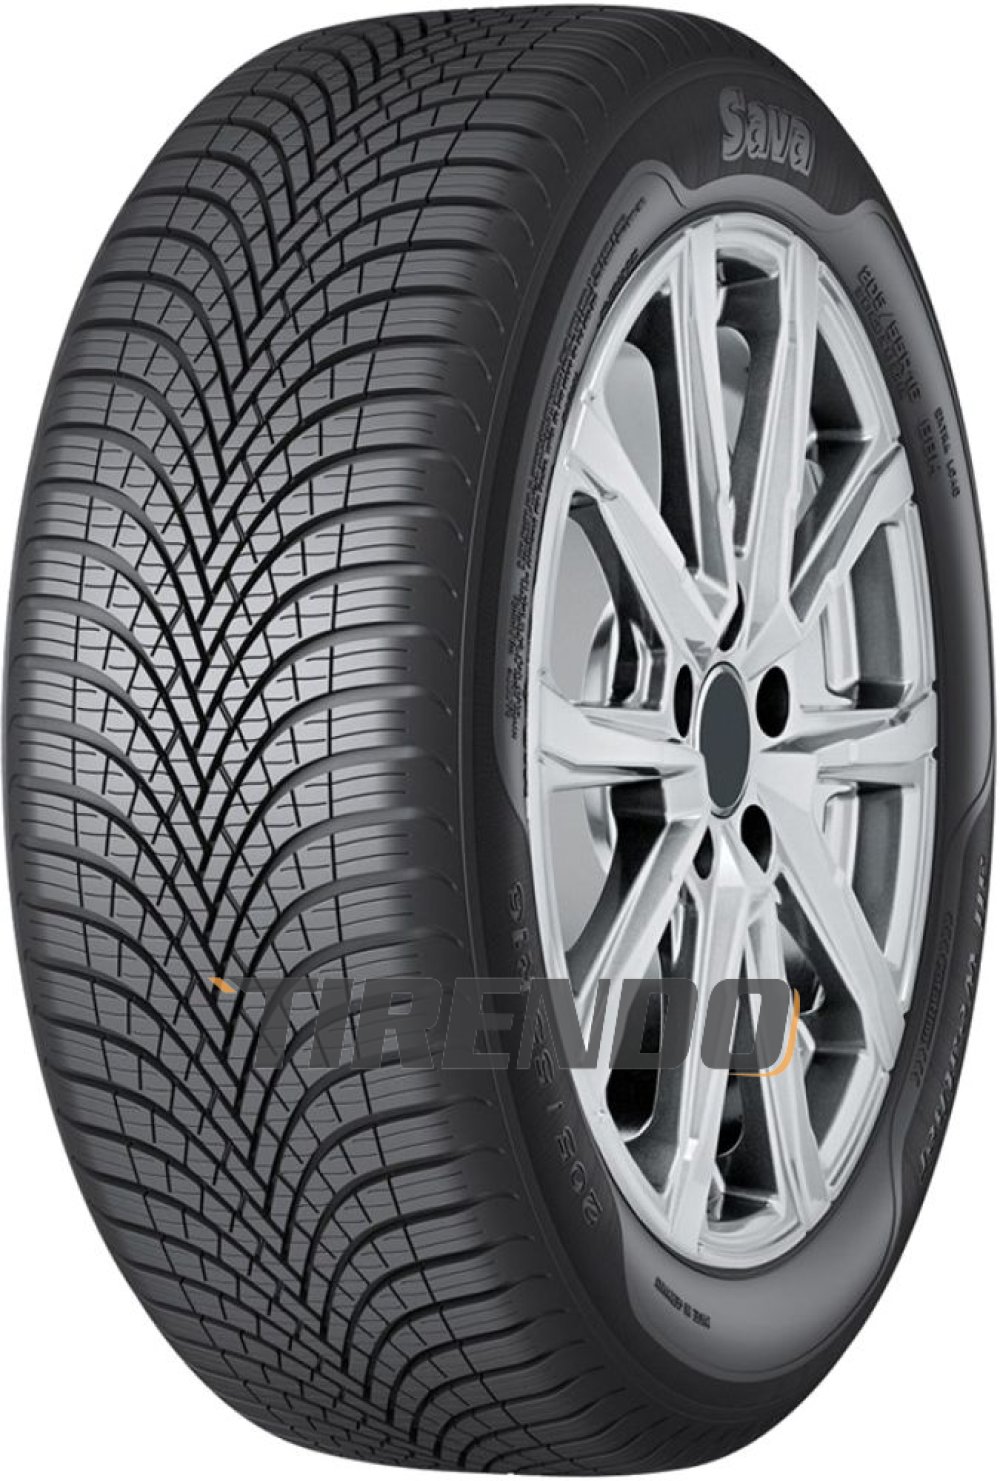 Image of Sava All Weather ( 185/60 R15 88H XL )